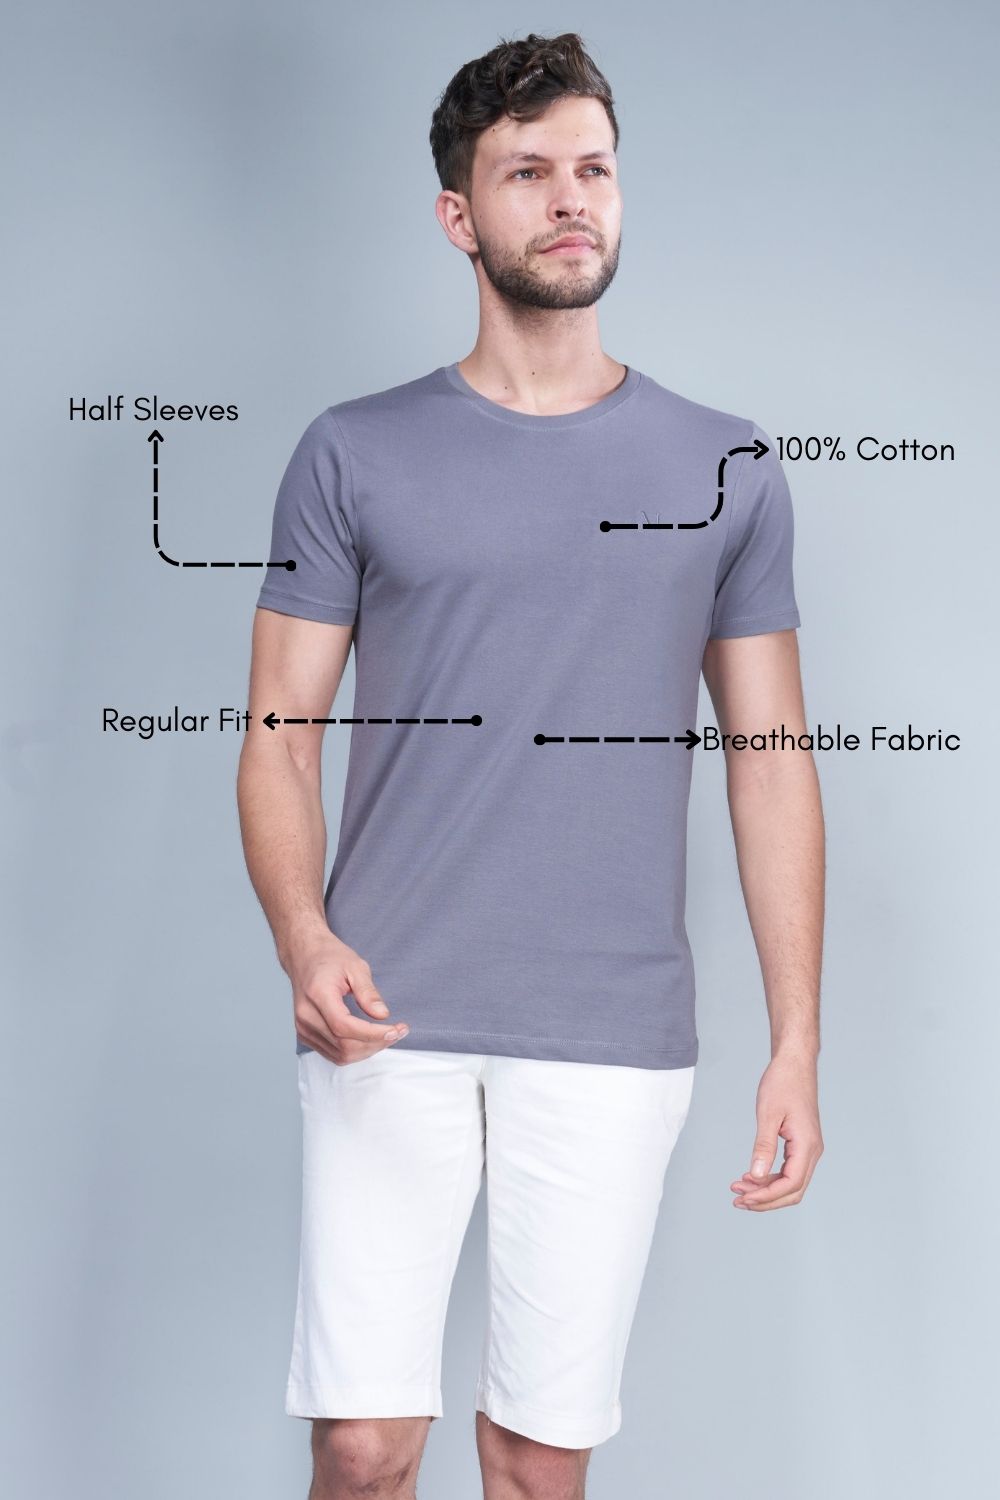 Vista Blue colored, solid t shirt for men with round neck and half sleeves, product features.